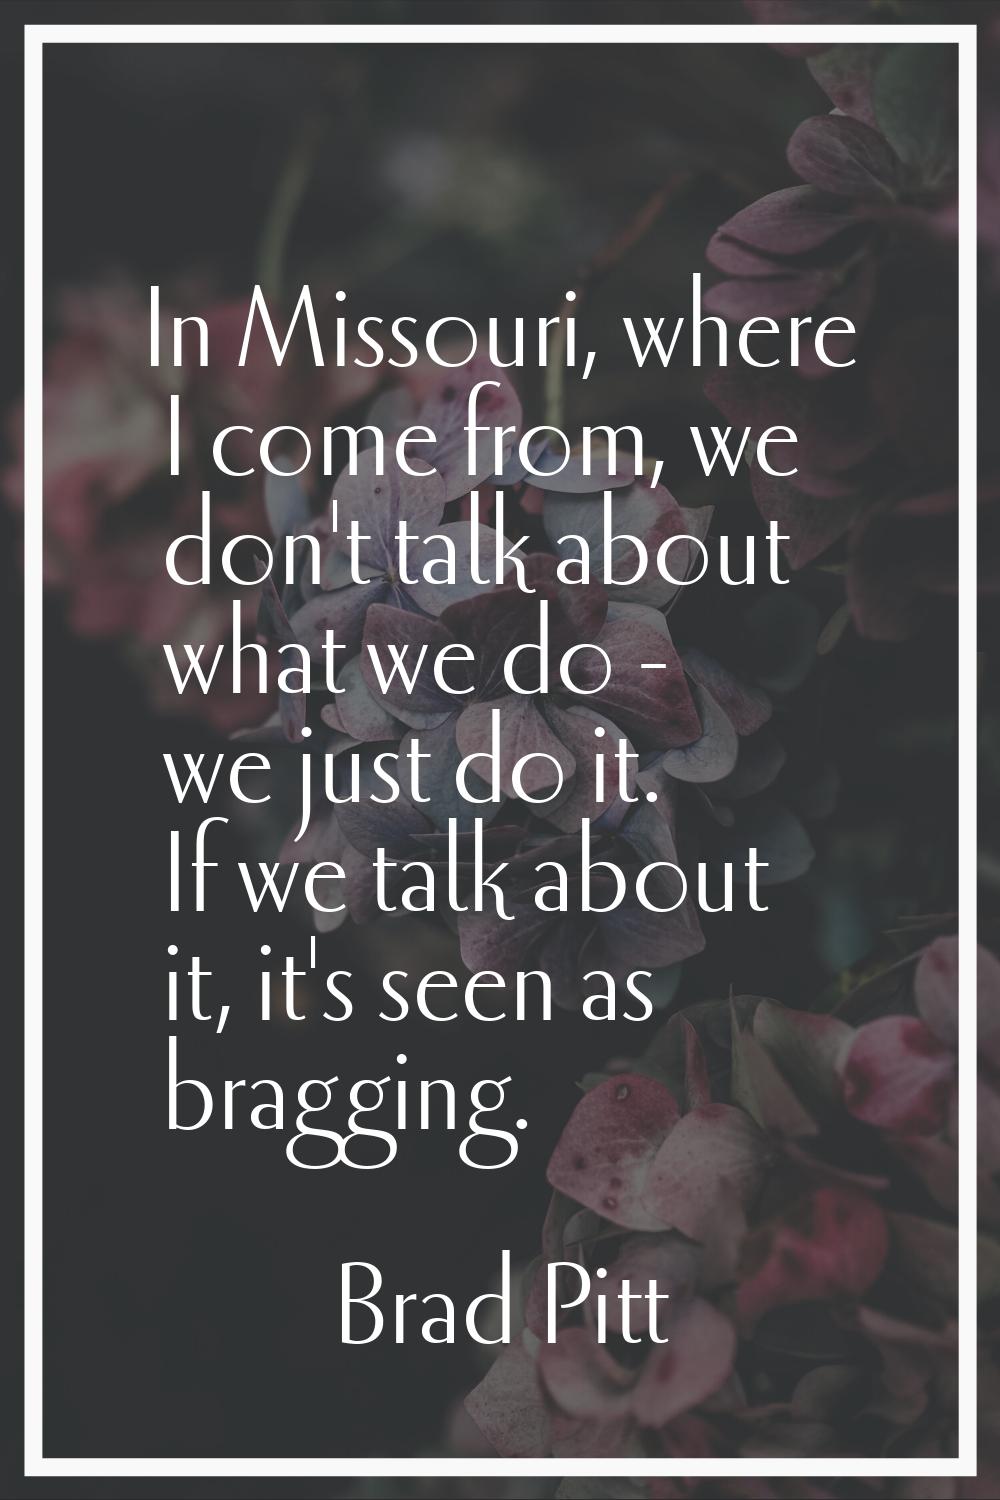 In Missouri, where I come from, we don't talk about what we do - we just do it. If we talk about it